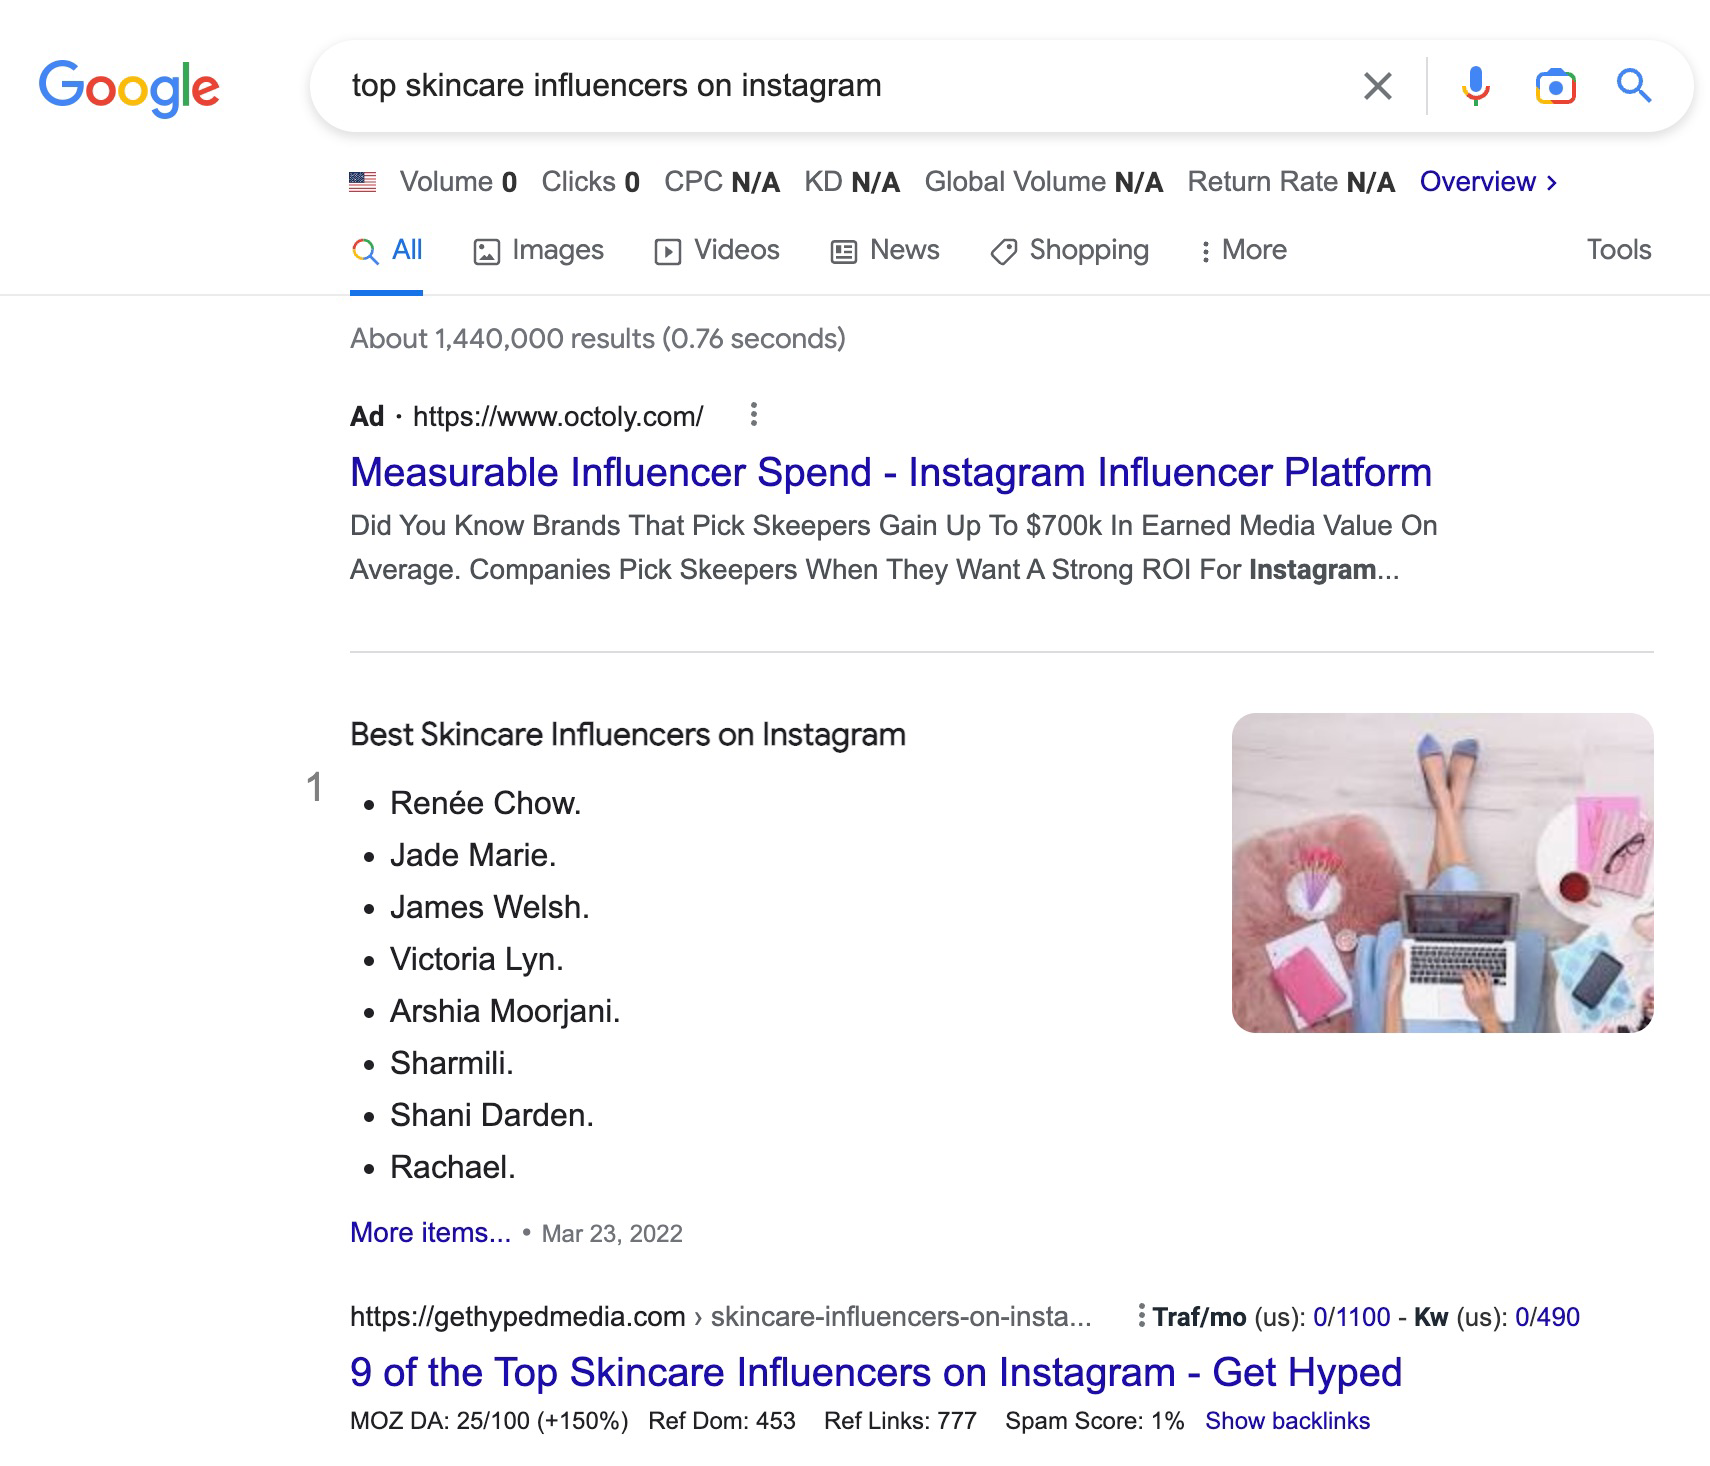 Influencers in google search